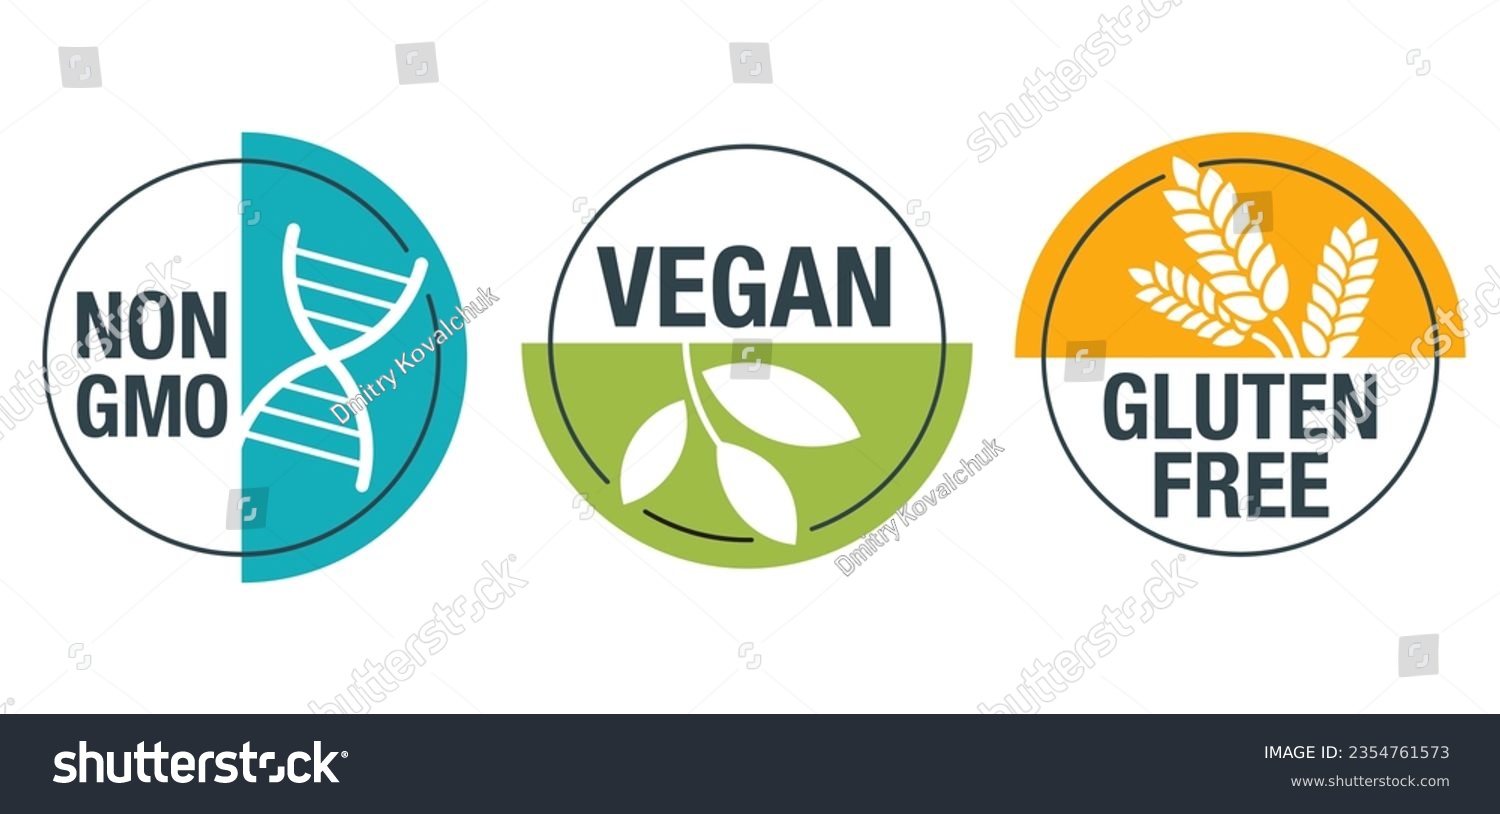 SVG of Vegan, Non-GMO, Gluten free - set of colorful pictograms for food packaging. Decoration for healthy natural organic nutrition svg